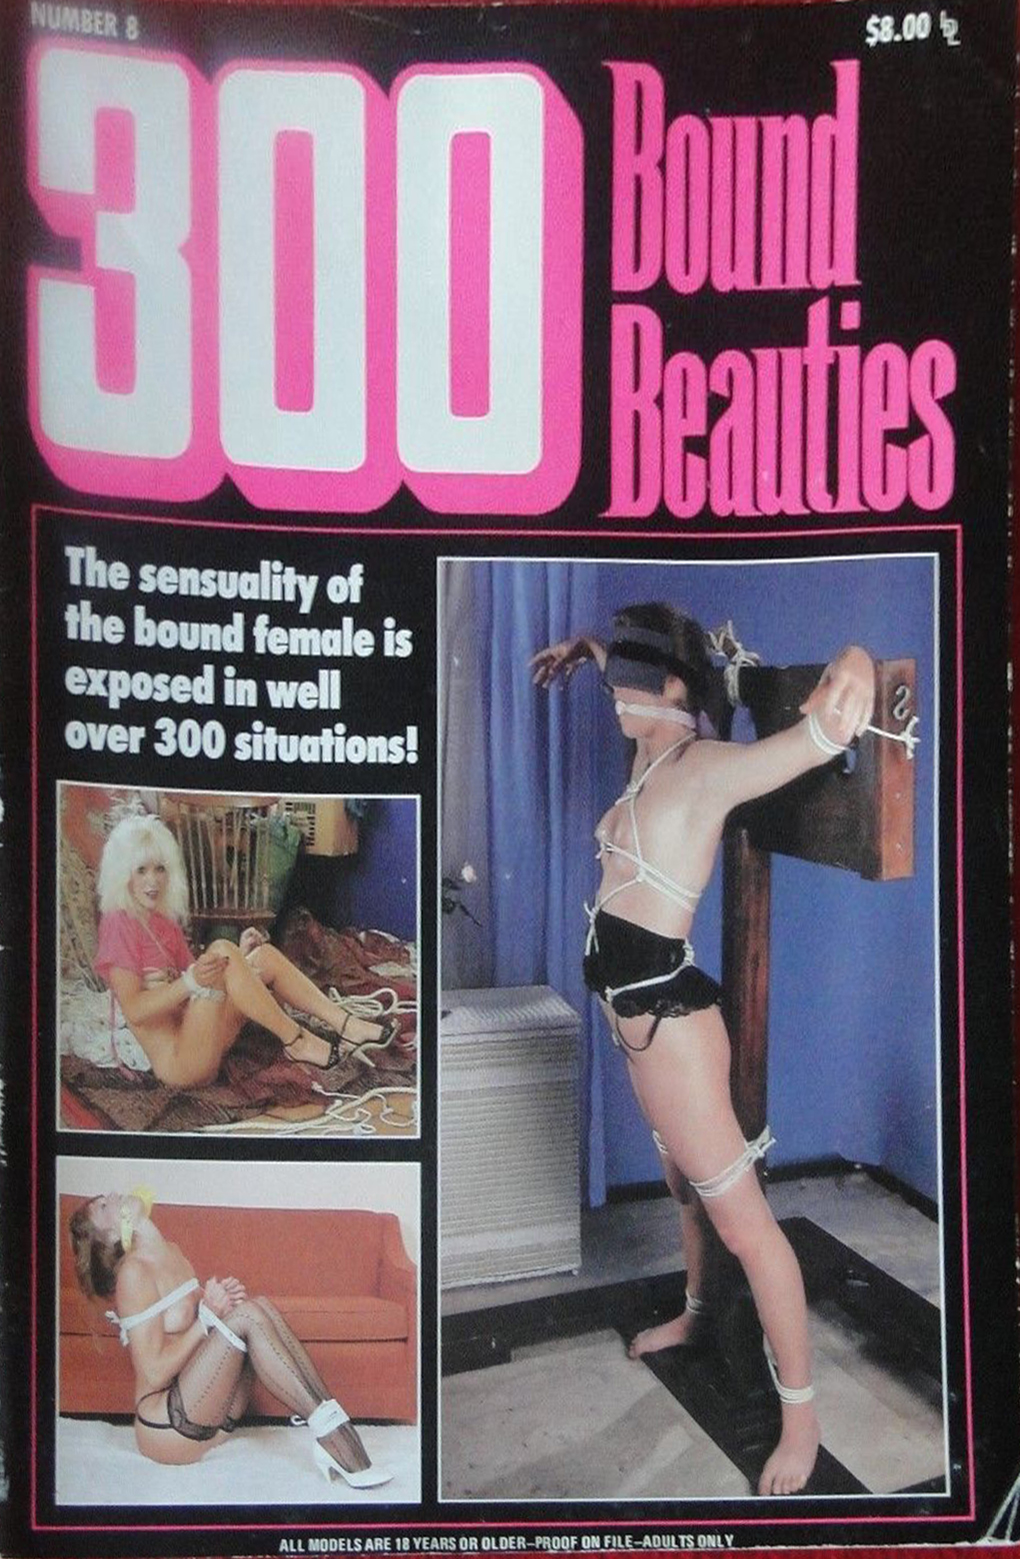 300 Bound Beauties # 8 magazine back issue 300 Bound Beauties magizine back copy 300 Bound Beauties # 8 Adult Pornographic Vintage Magazine Back Issue Published by Briarwood Publishing Group. The Sensuality Of The Bound Female Is Exposed In Well Over 300 Situations!.